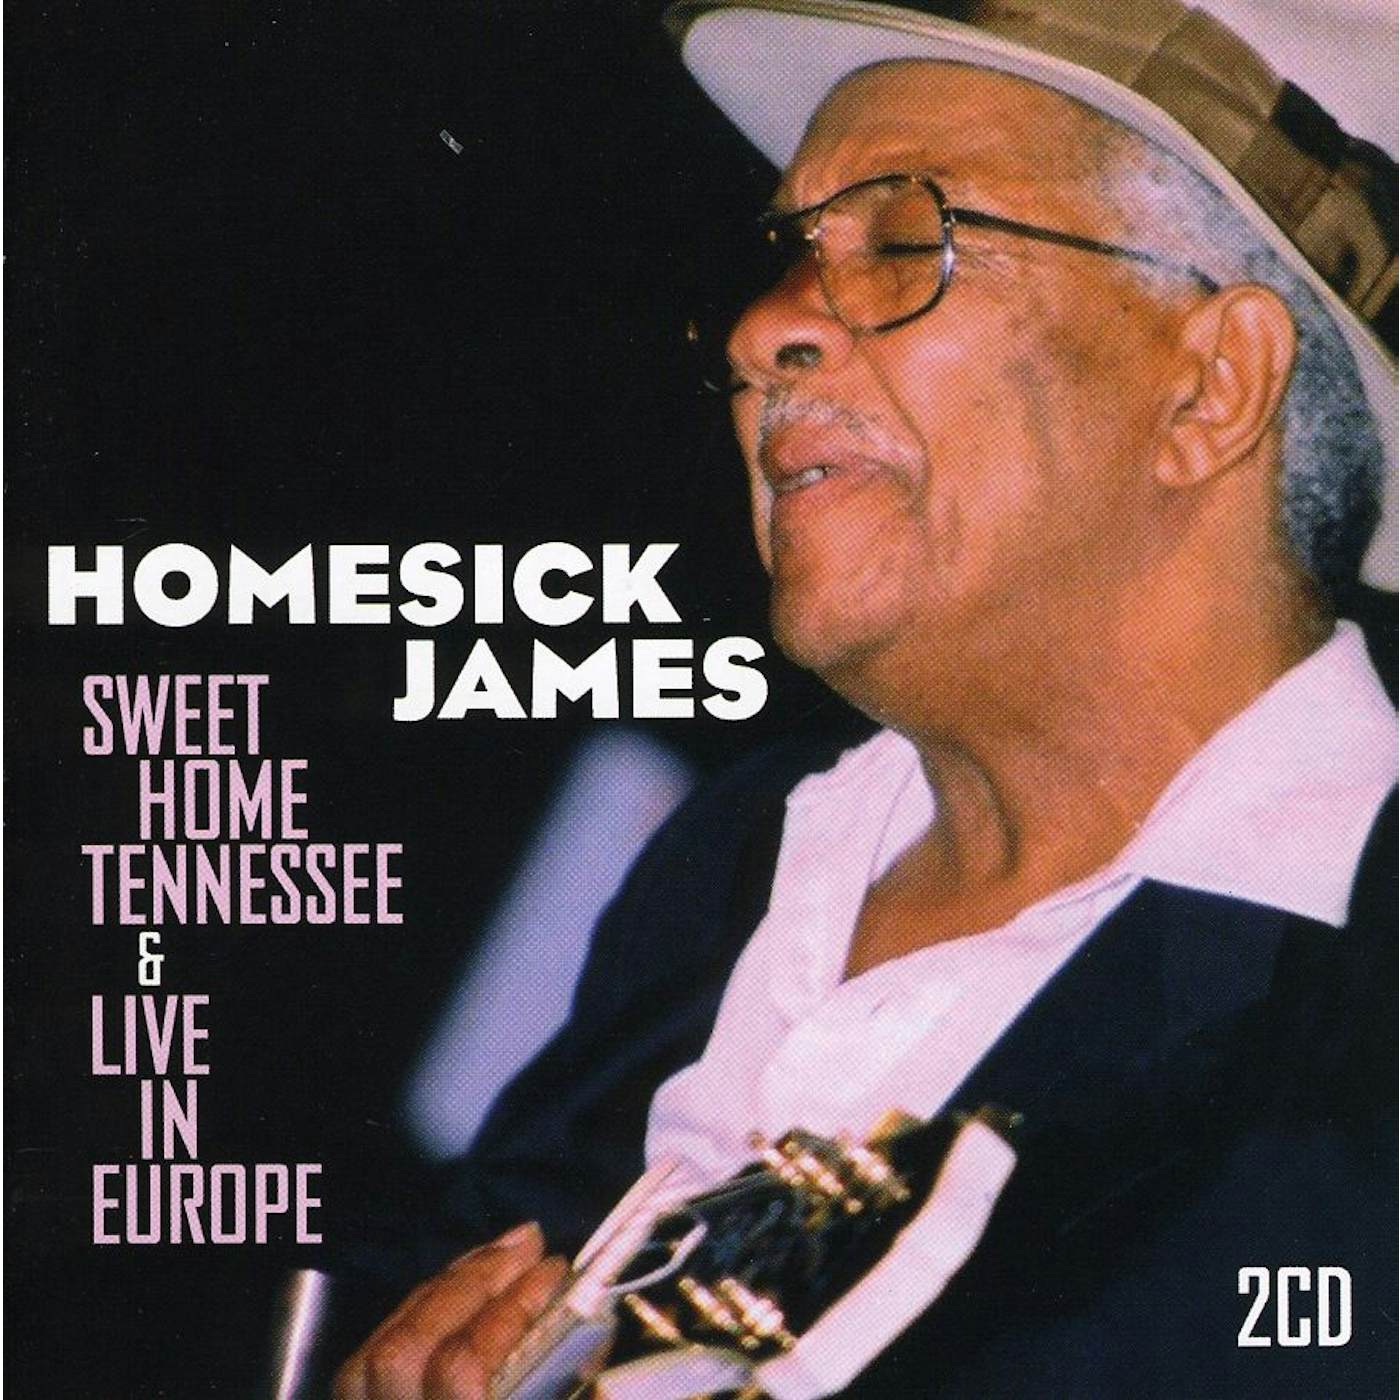 Homesick James SWEET HOME TENNESSEE / LIVE IN EUROPE CD